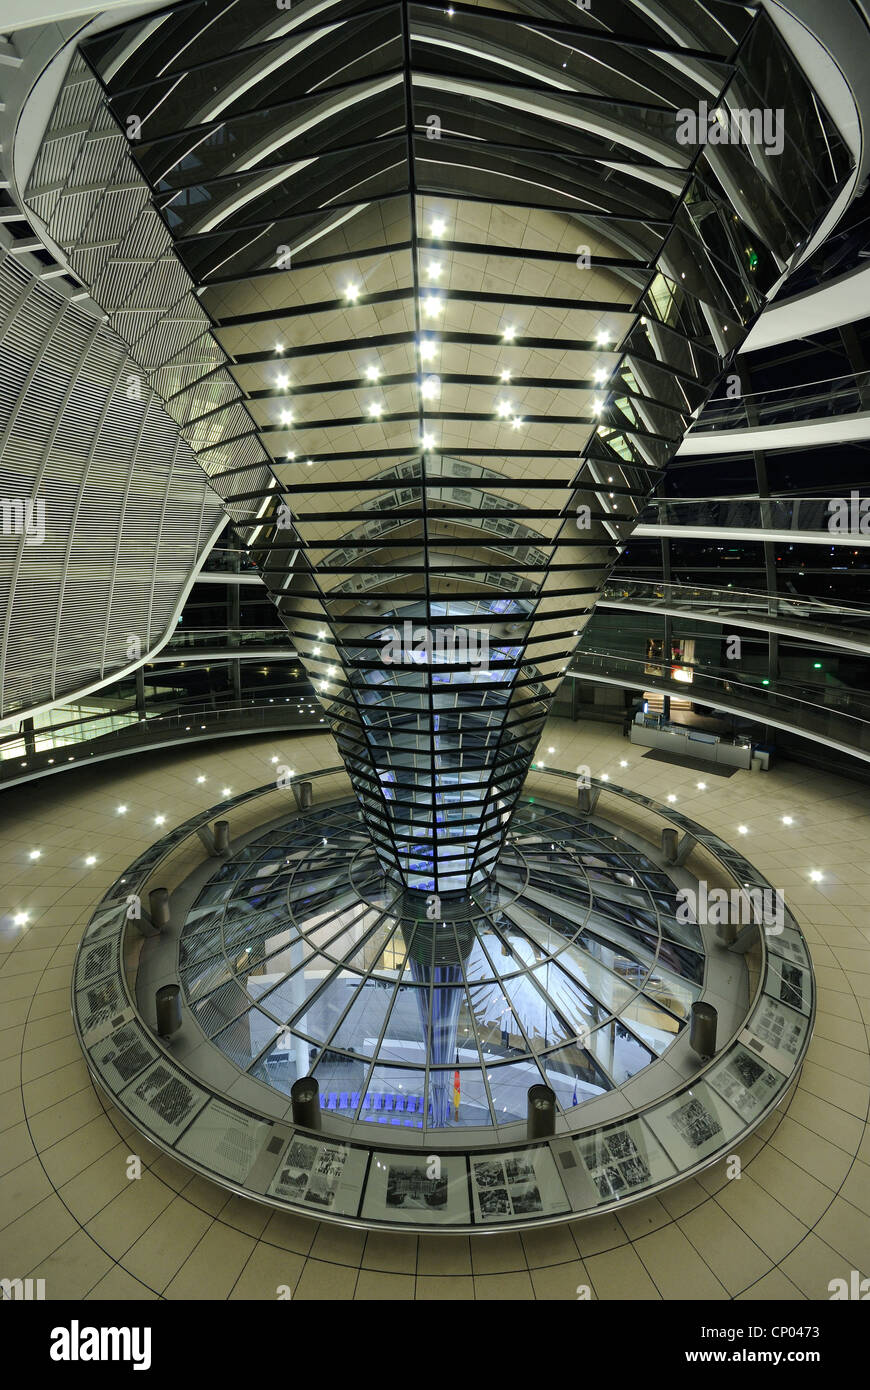 Interior view, dome of the Reichstag building at night, seat of the Bundestag, German Parliament, Berlin, Germany, Europe Stock Photo